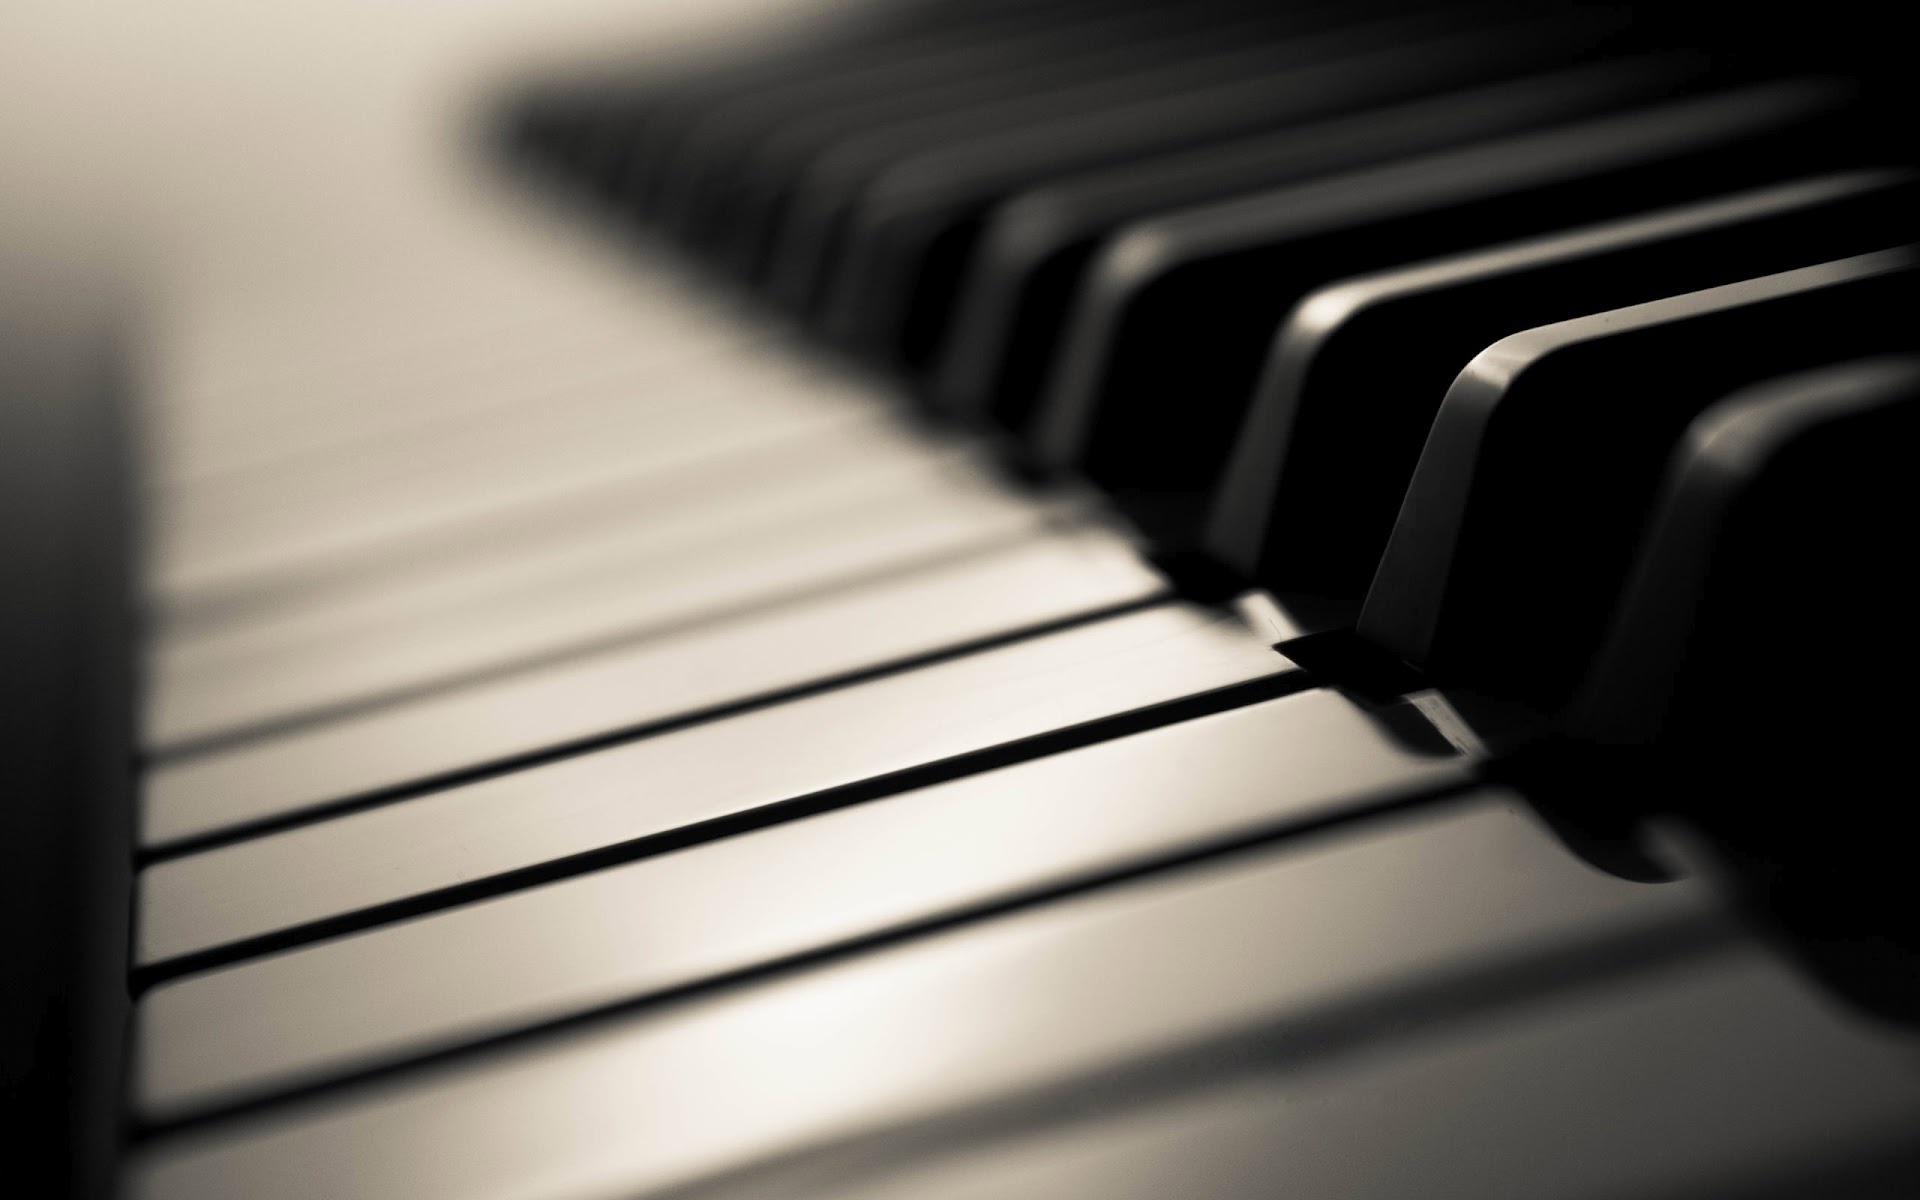 Fortepiano: Close View On A Keyboard, Seven Notes Of Each Octave, The Five Half-Tones. 1920x1200 HD Wallpaper.